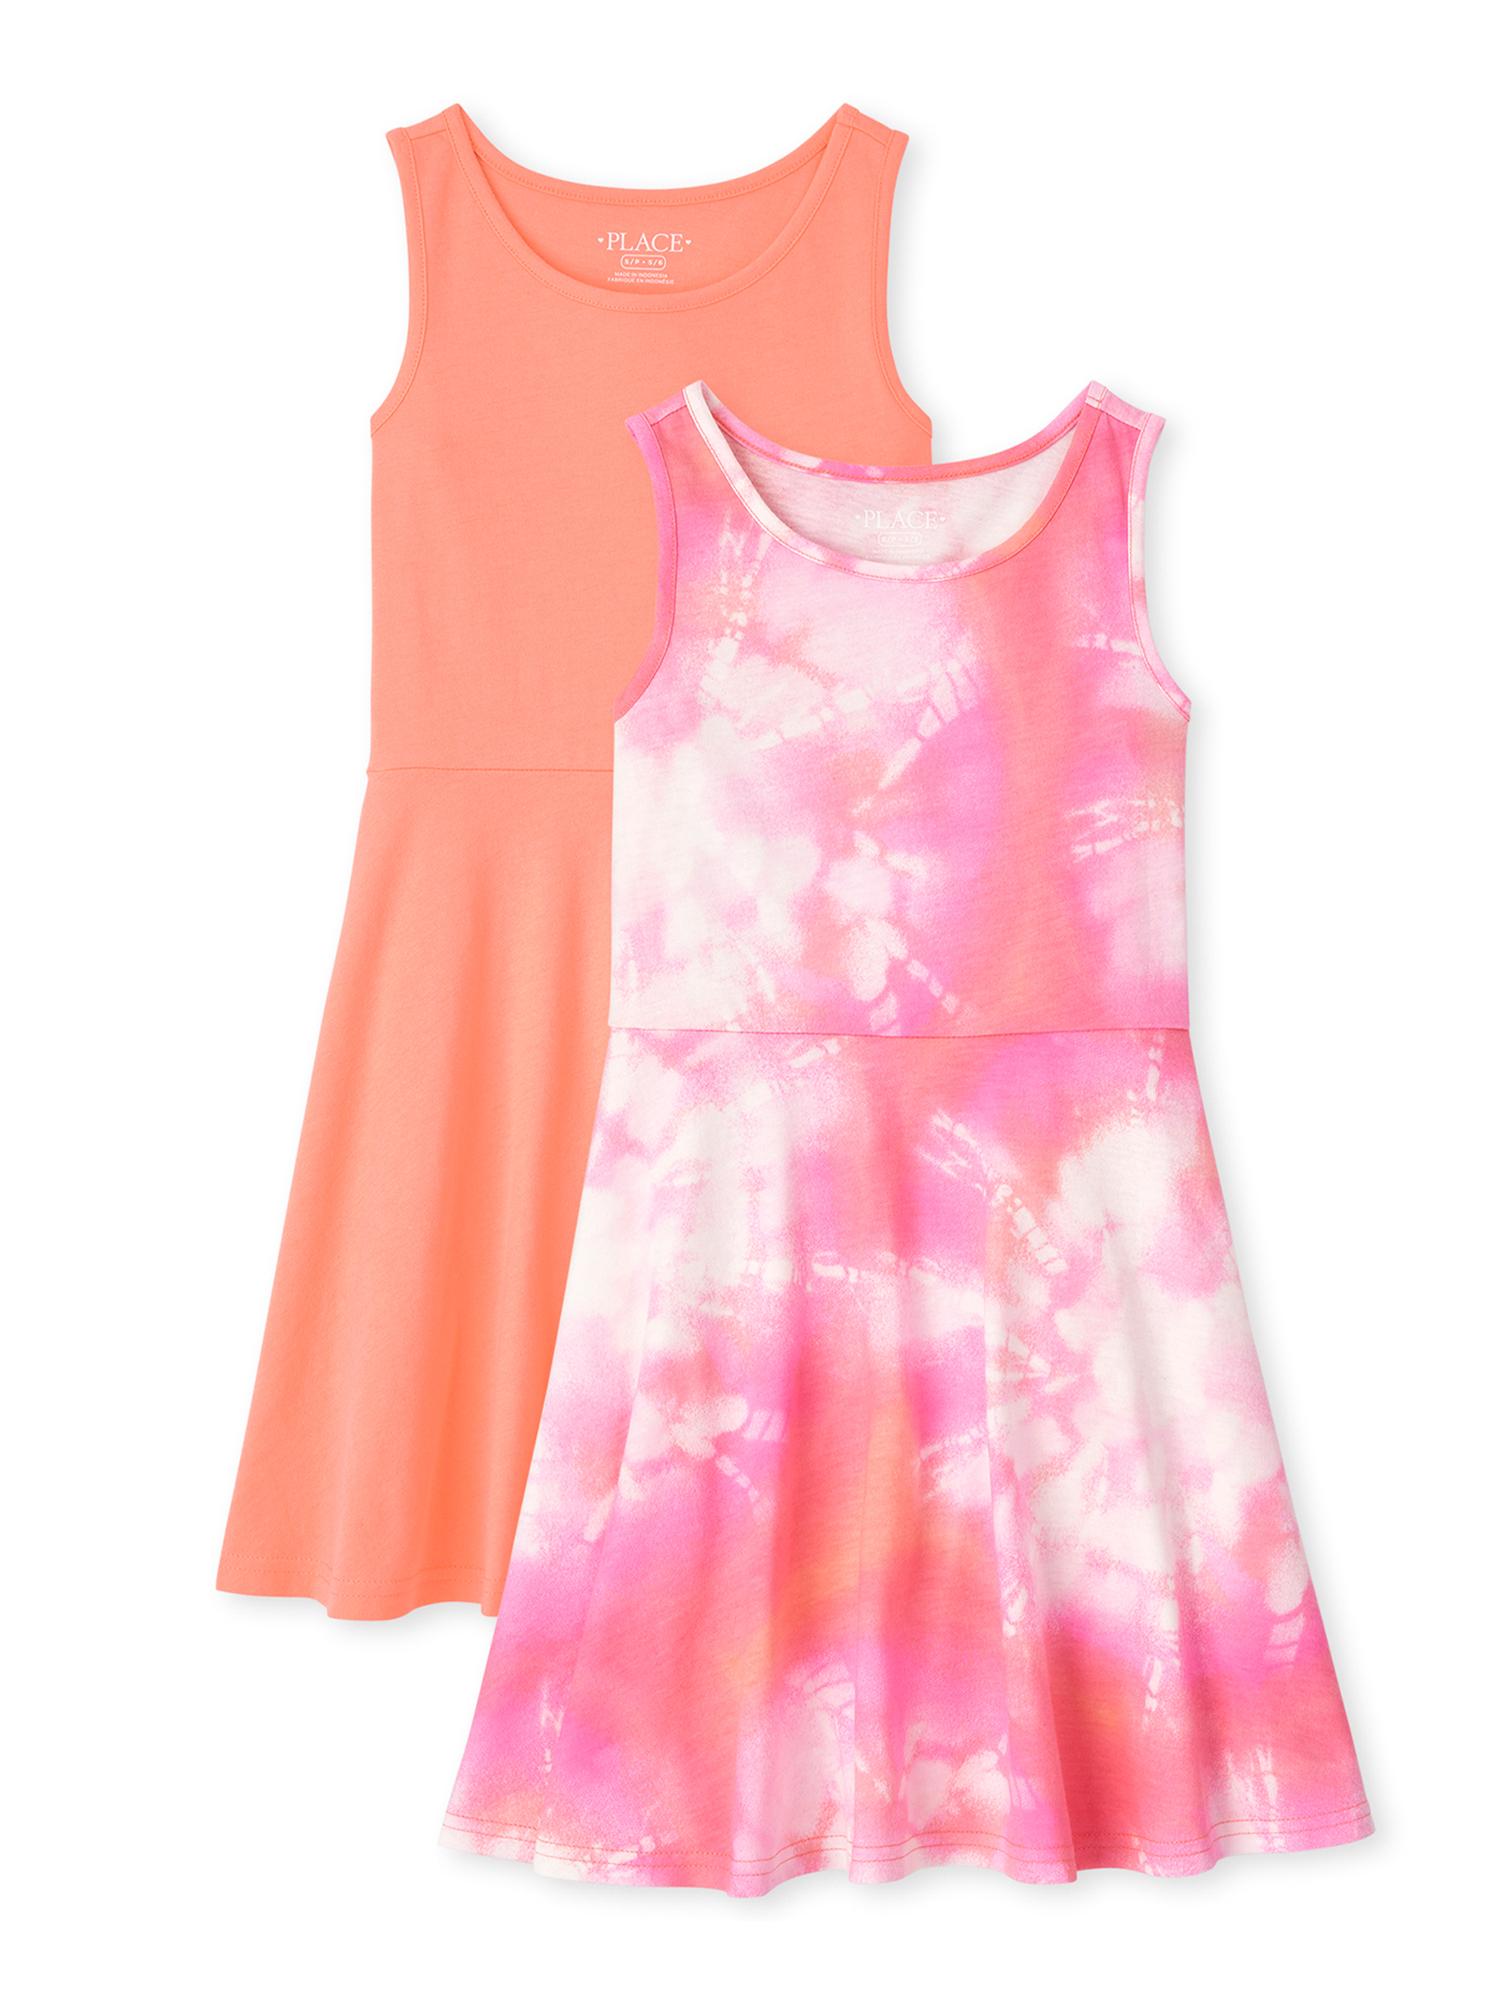 The Children's Place Girls Tank Dresses, 2-Pack, Sizes 5-16 - image 1 of 1